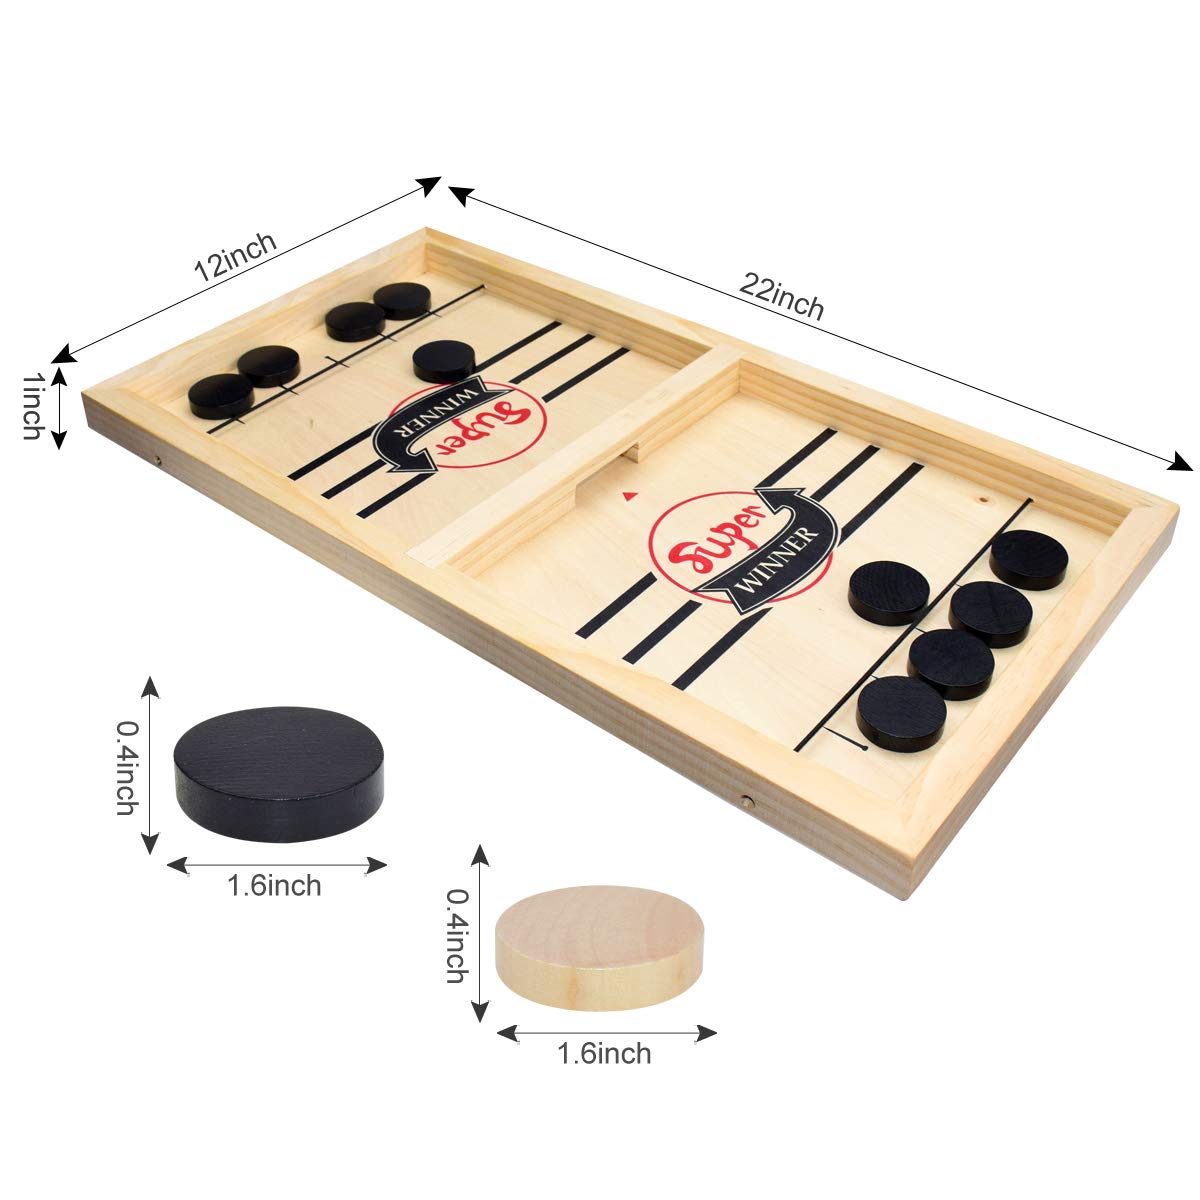 BAKAM Super Fast Sling Puck Game, Portable Table Hockey Game for Kids and Adults, Tabletop Slingshot Games Toys for Boys and Girls, Desktop Sport Board Game for Family Game Night Fun (Large)